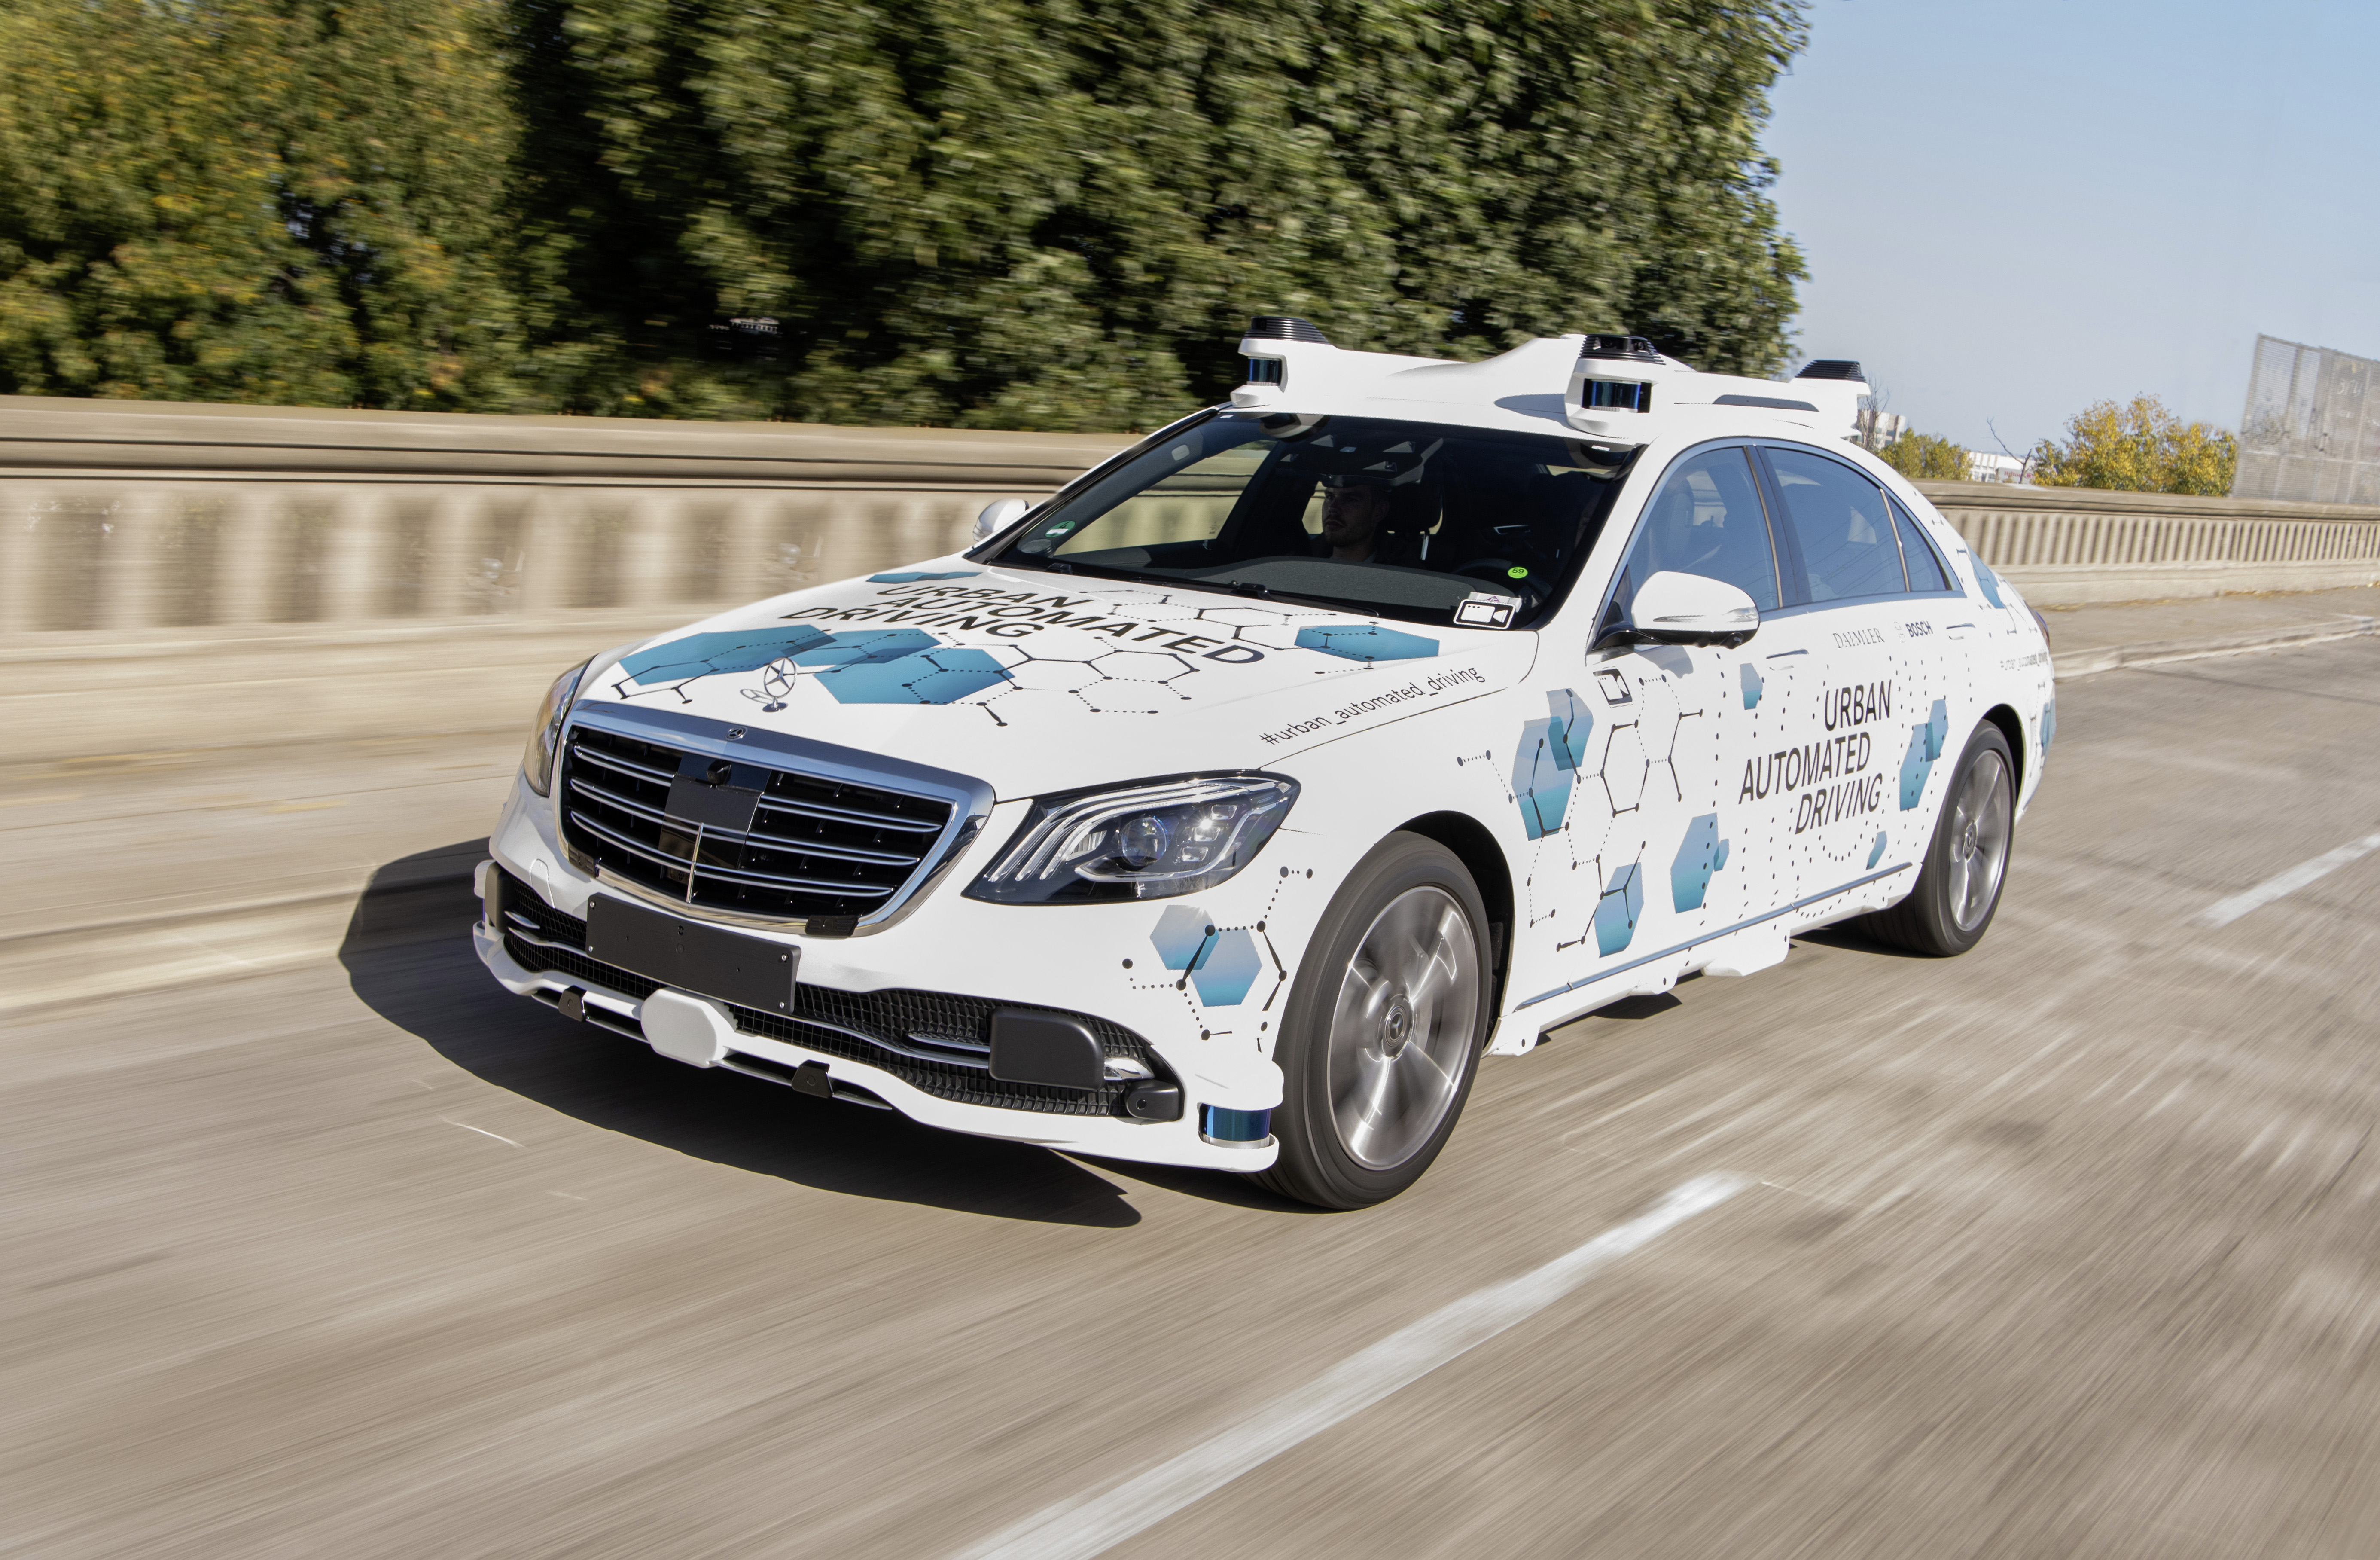 Automated driving in city traffic